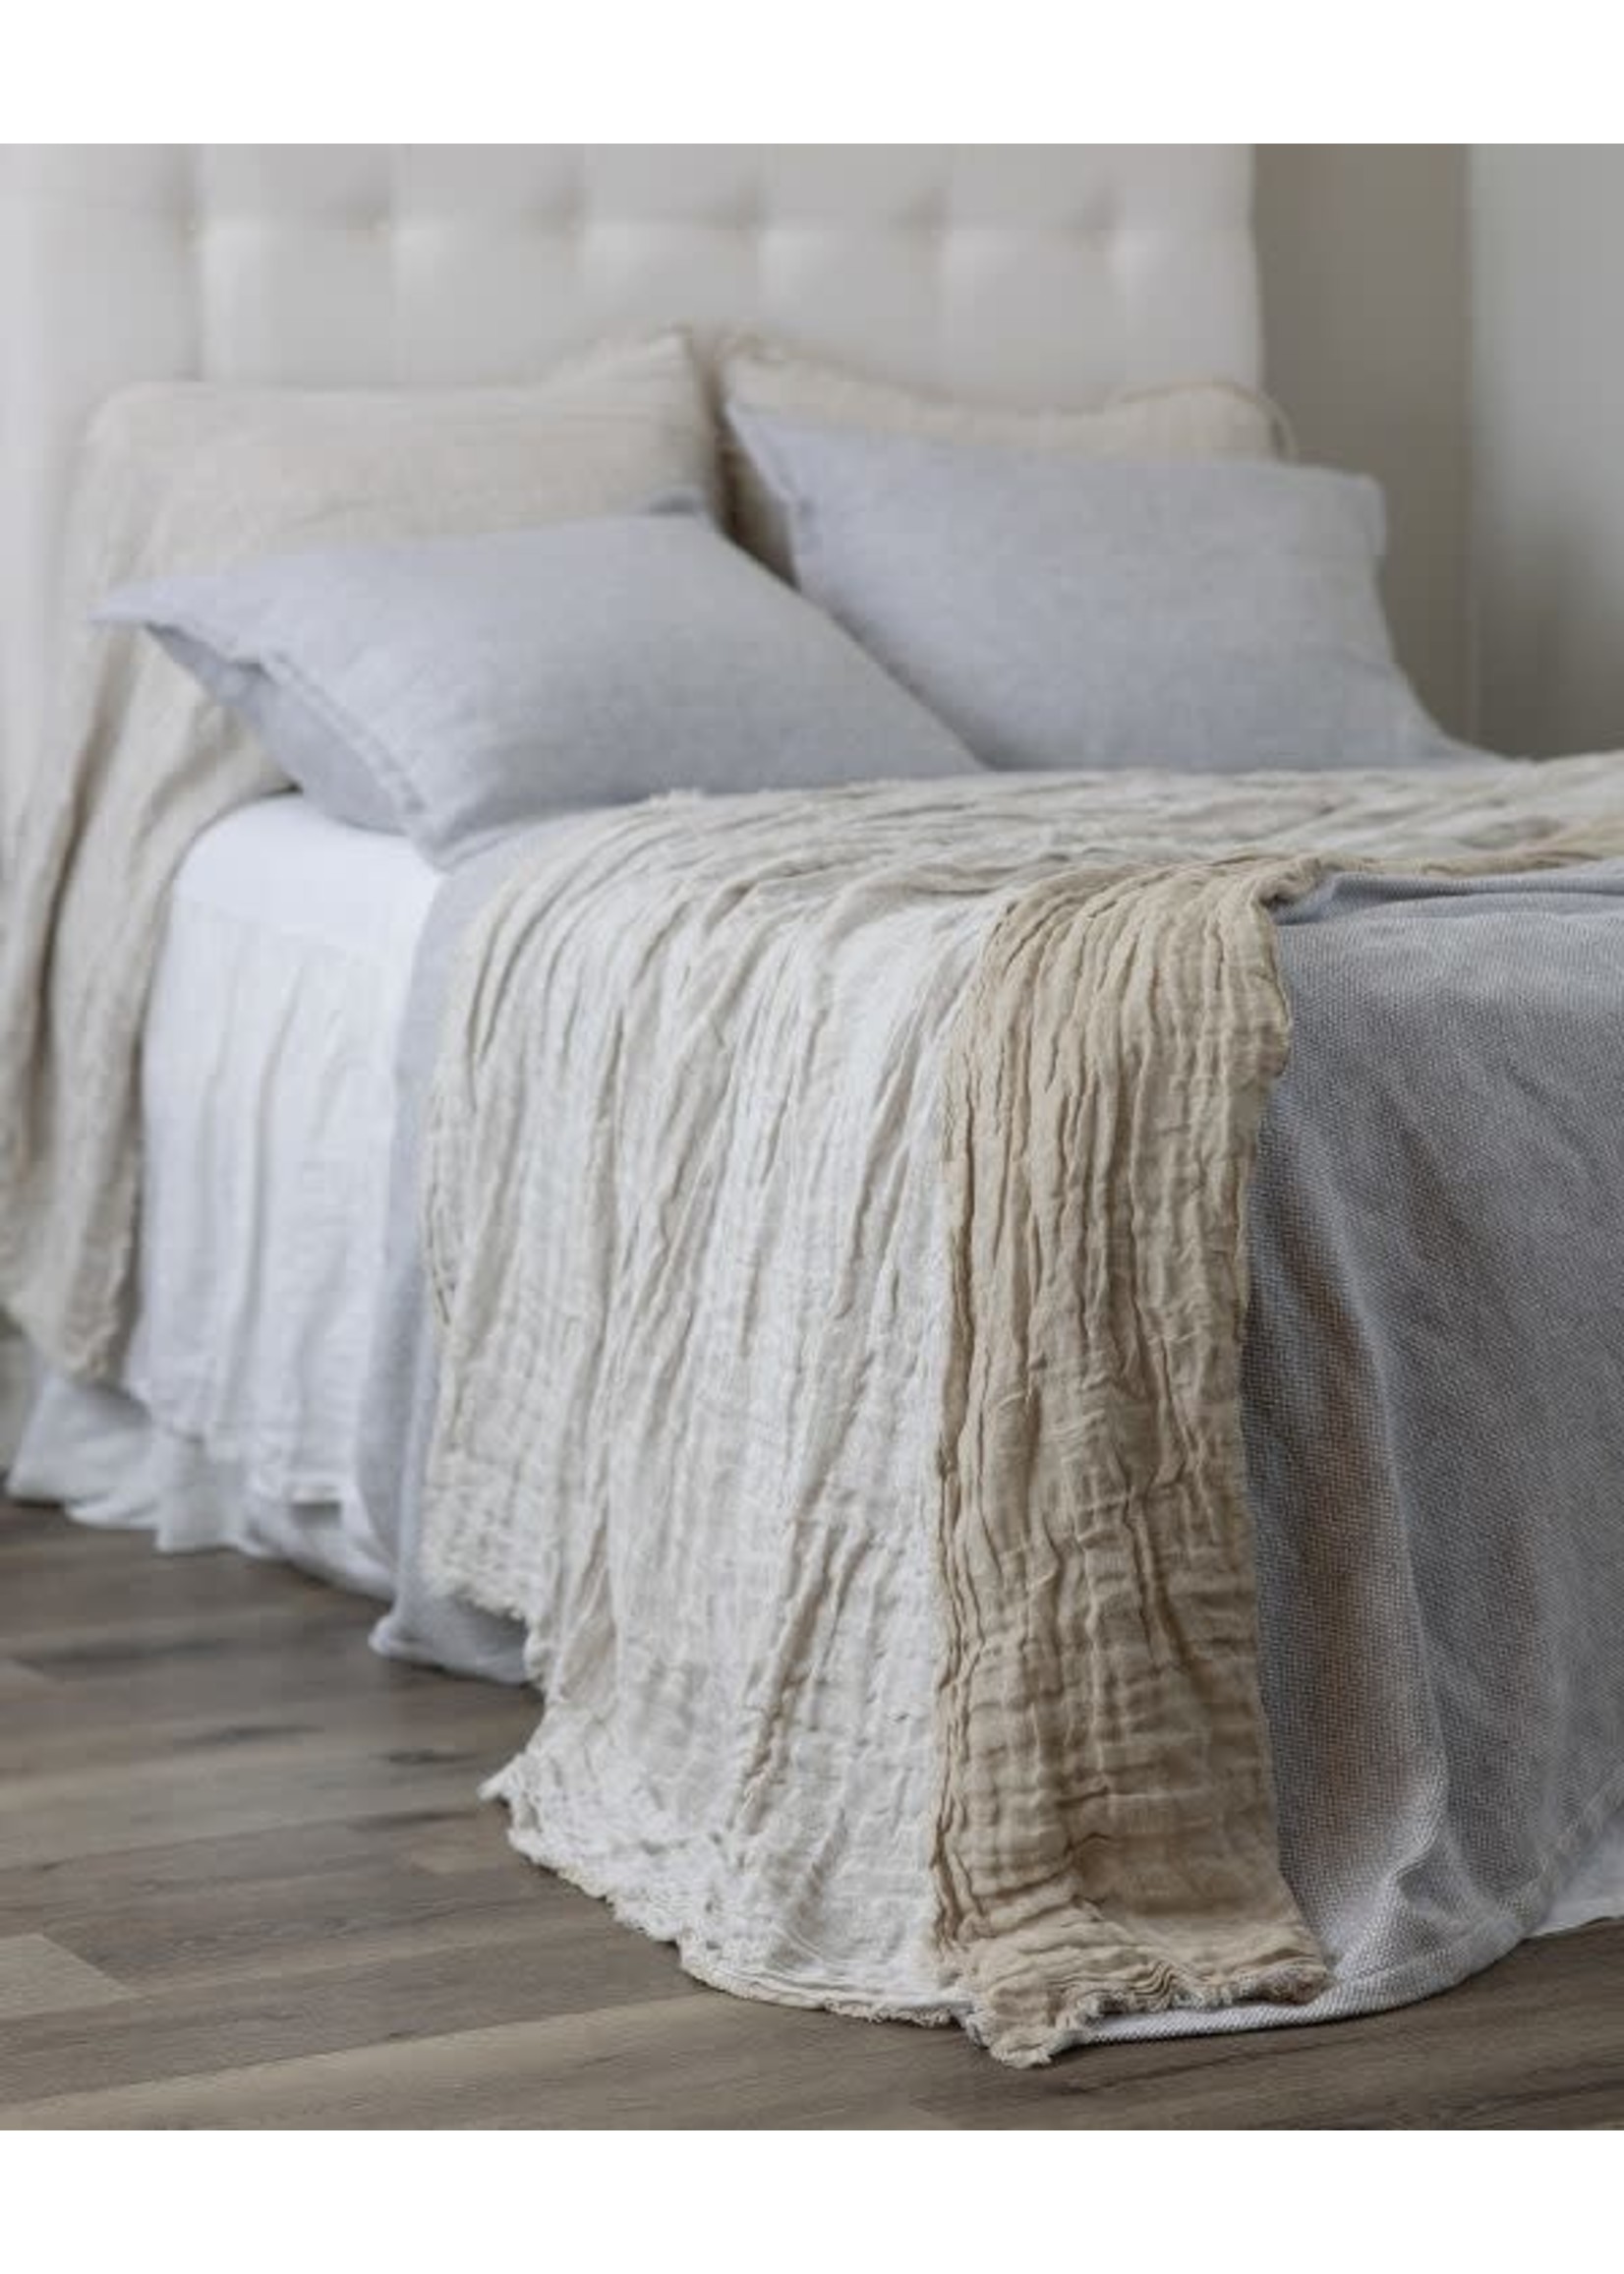 Amity Home Amity Home Kent Linen Bedspread White Natural Queen